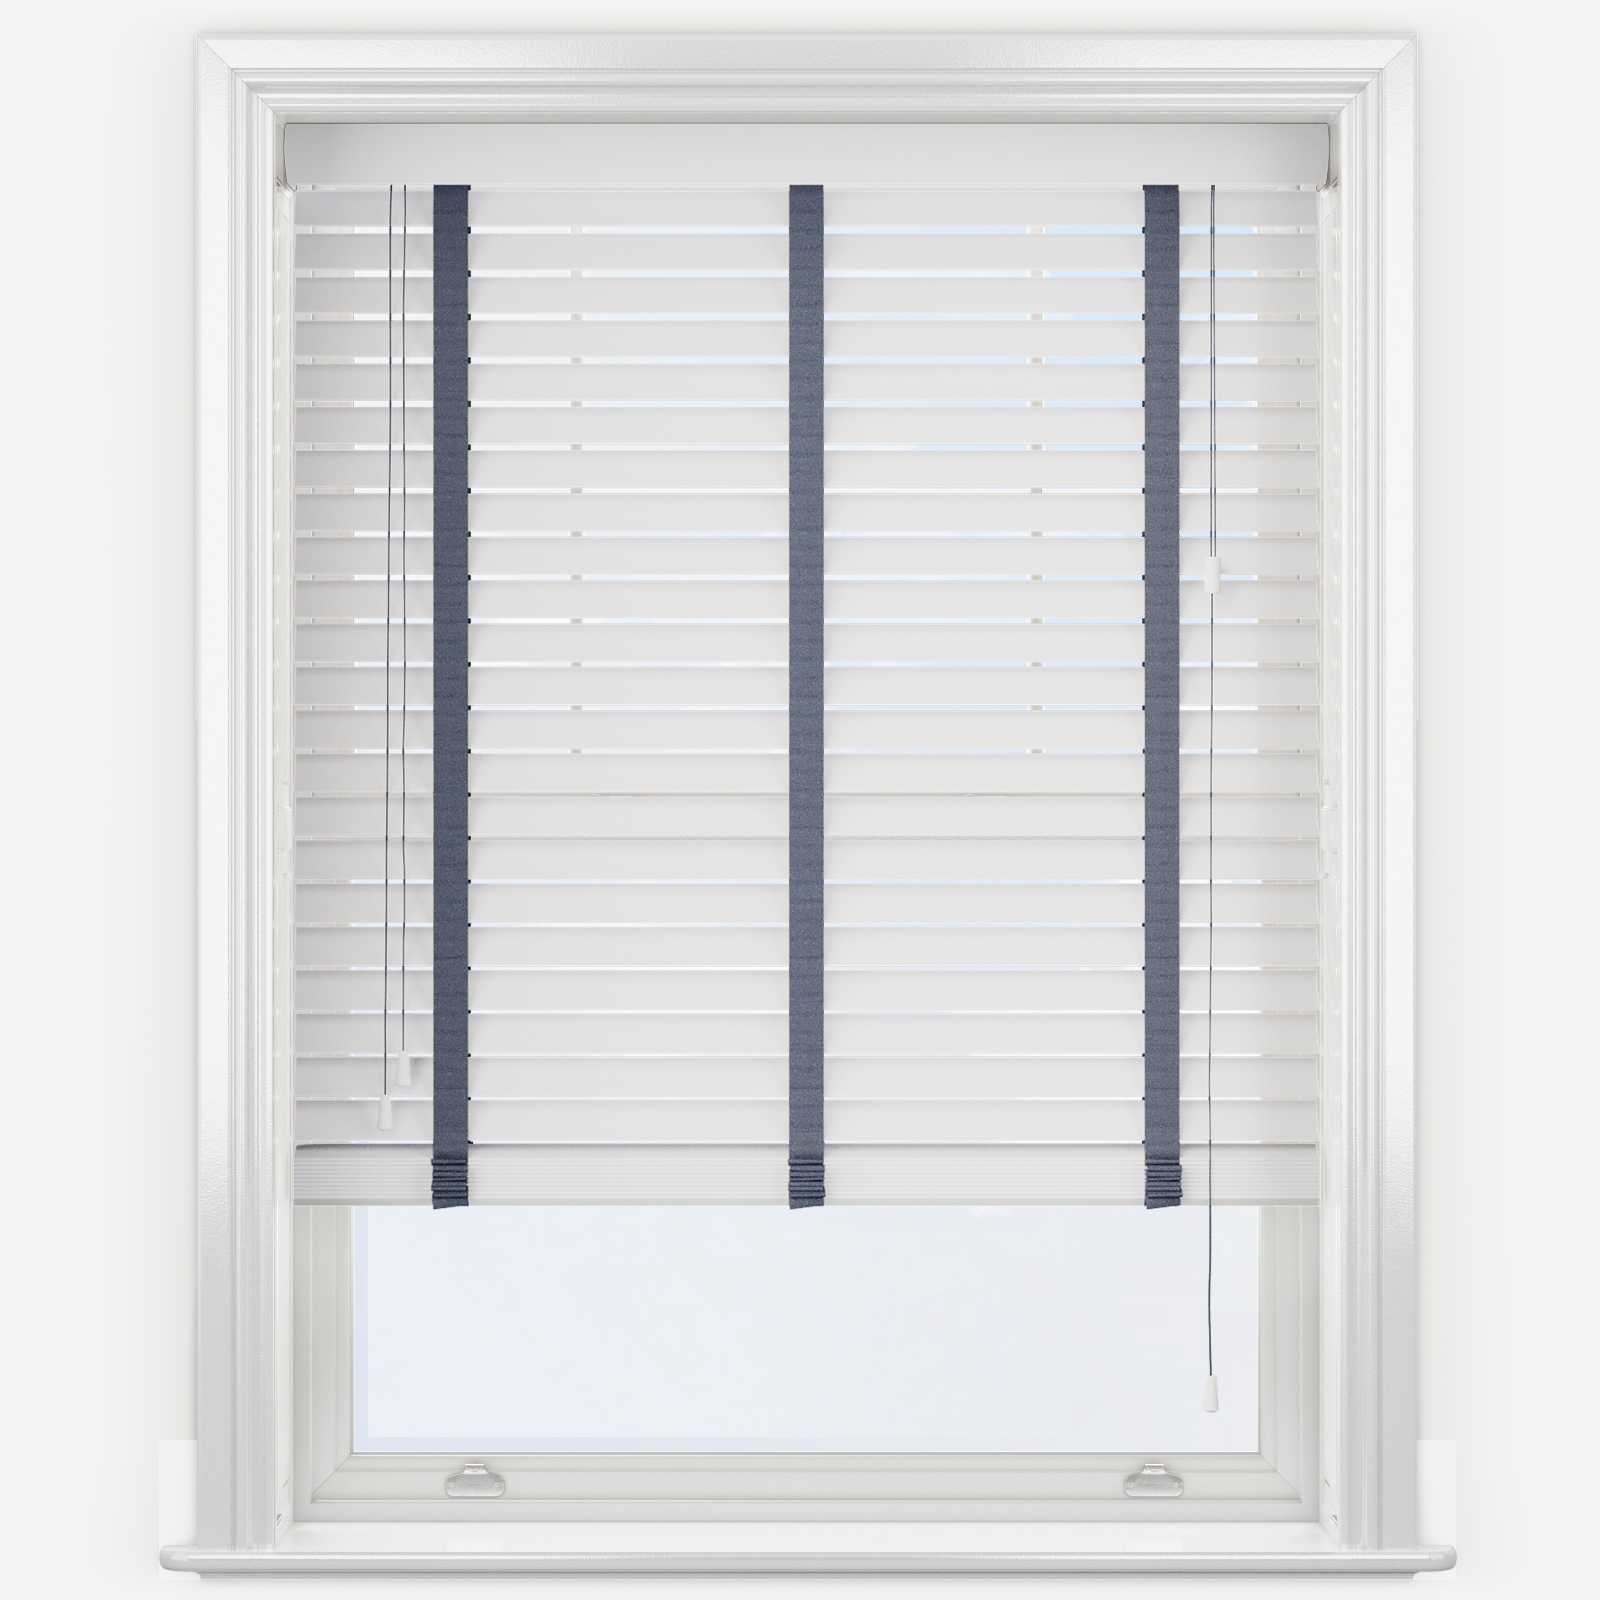 W Swift Direct Blinds Made to Measure 50mm Slat Faux Wood Blind Premier Taped Bright White custom made in 24 size ranges individually made to your custom sizes 1200mm X 1200mm D 